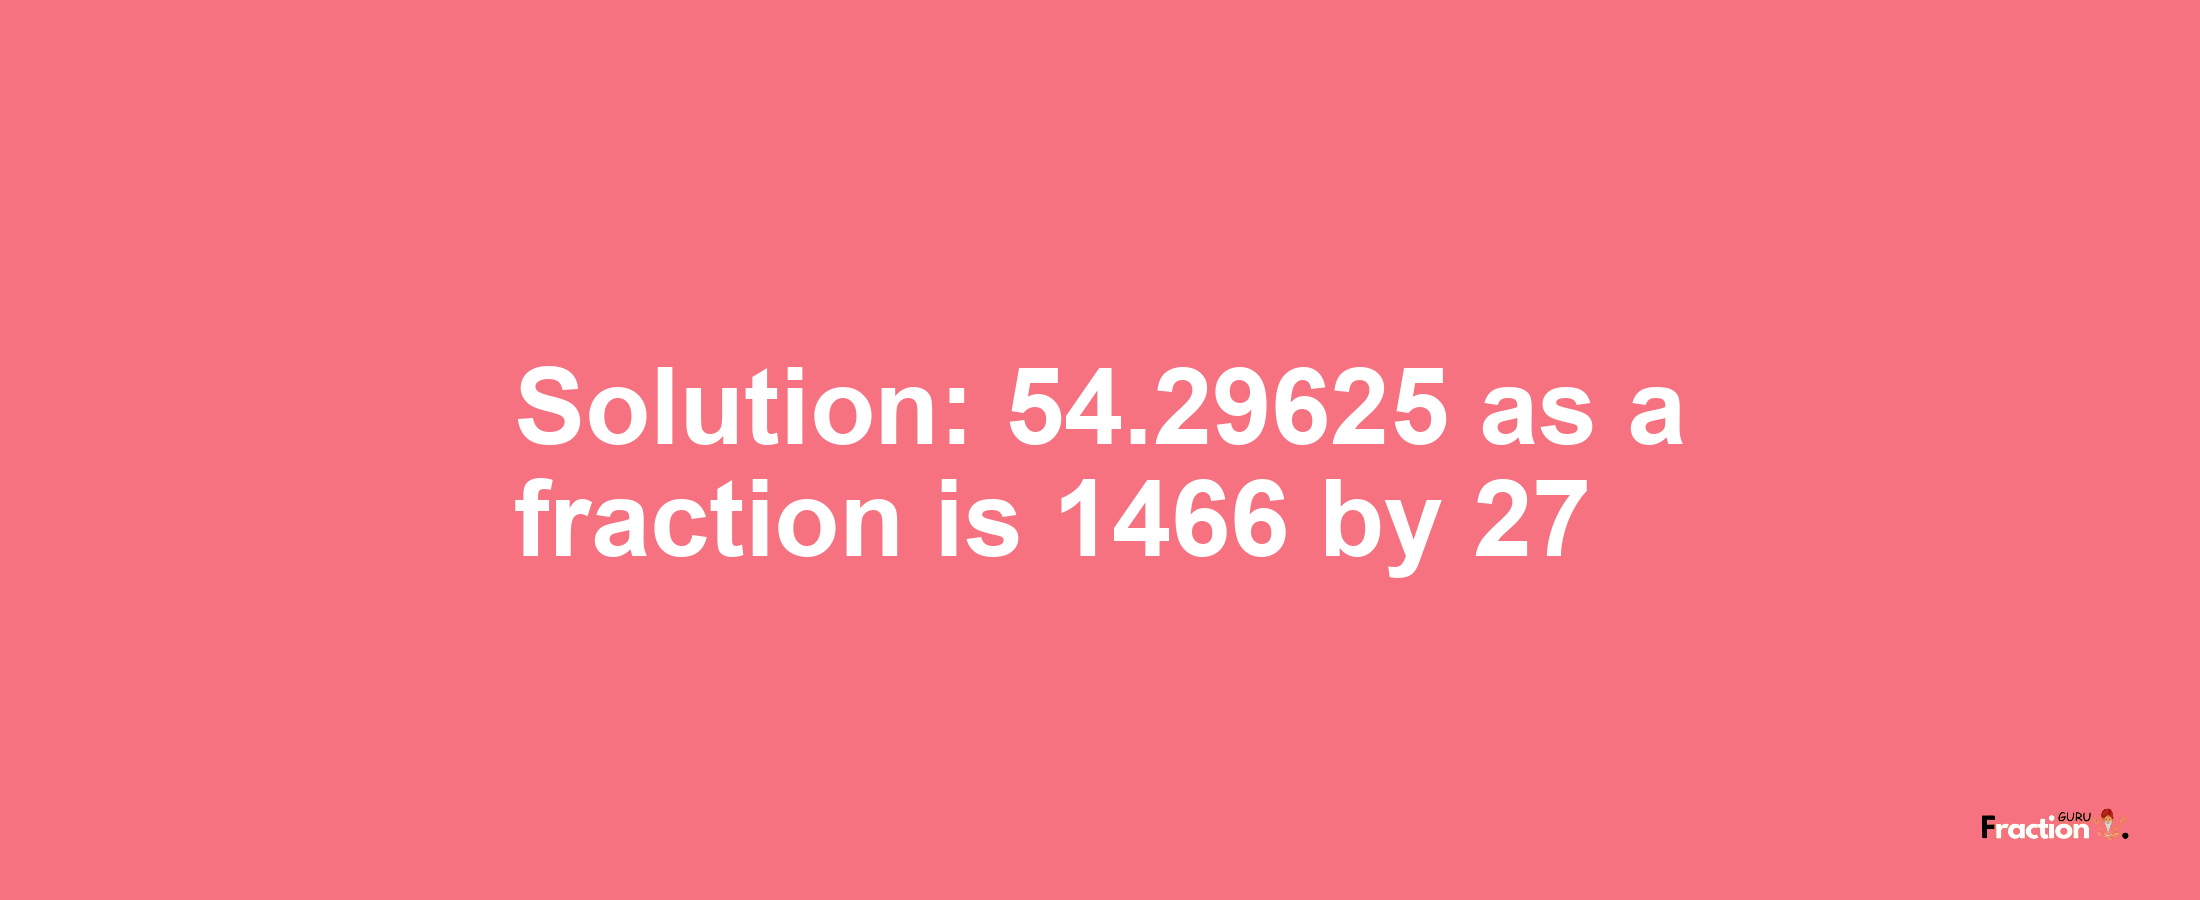 Solution:54.29625 as a fraction is 1466/27